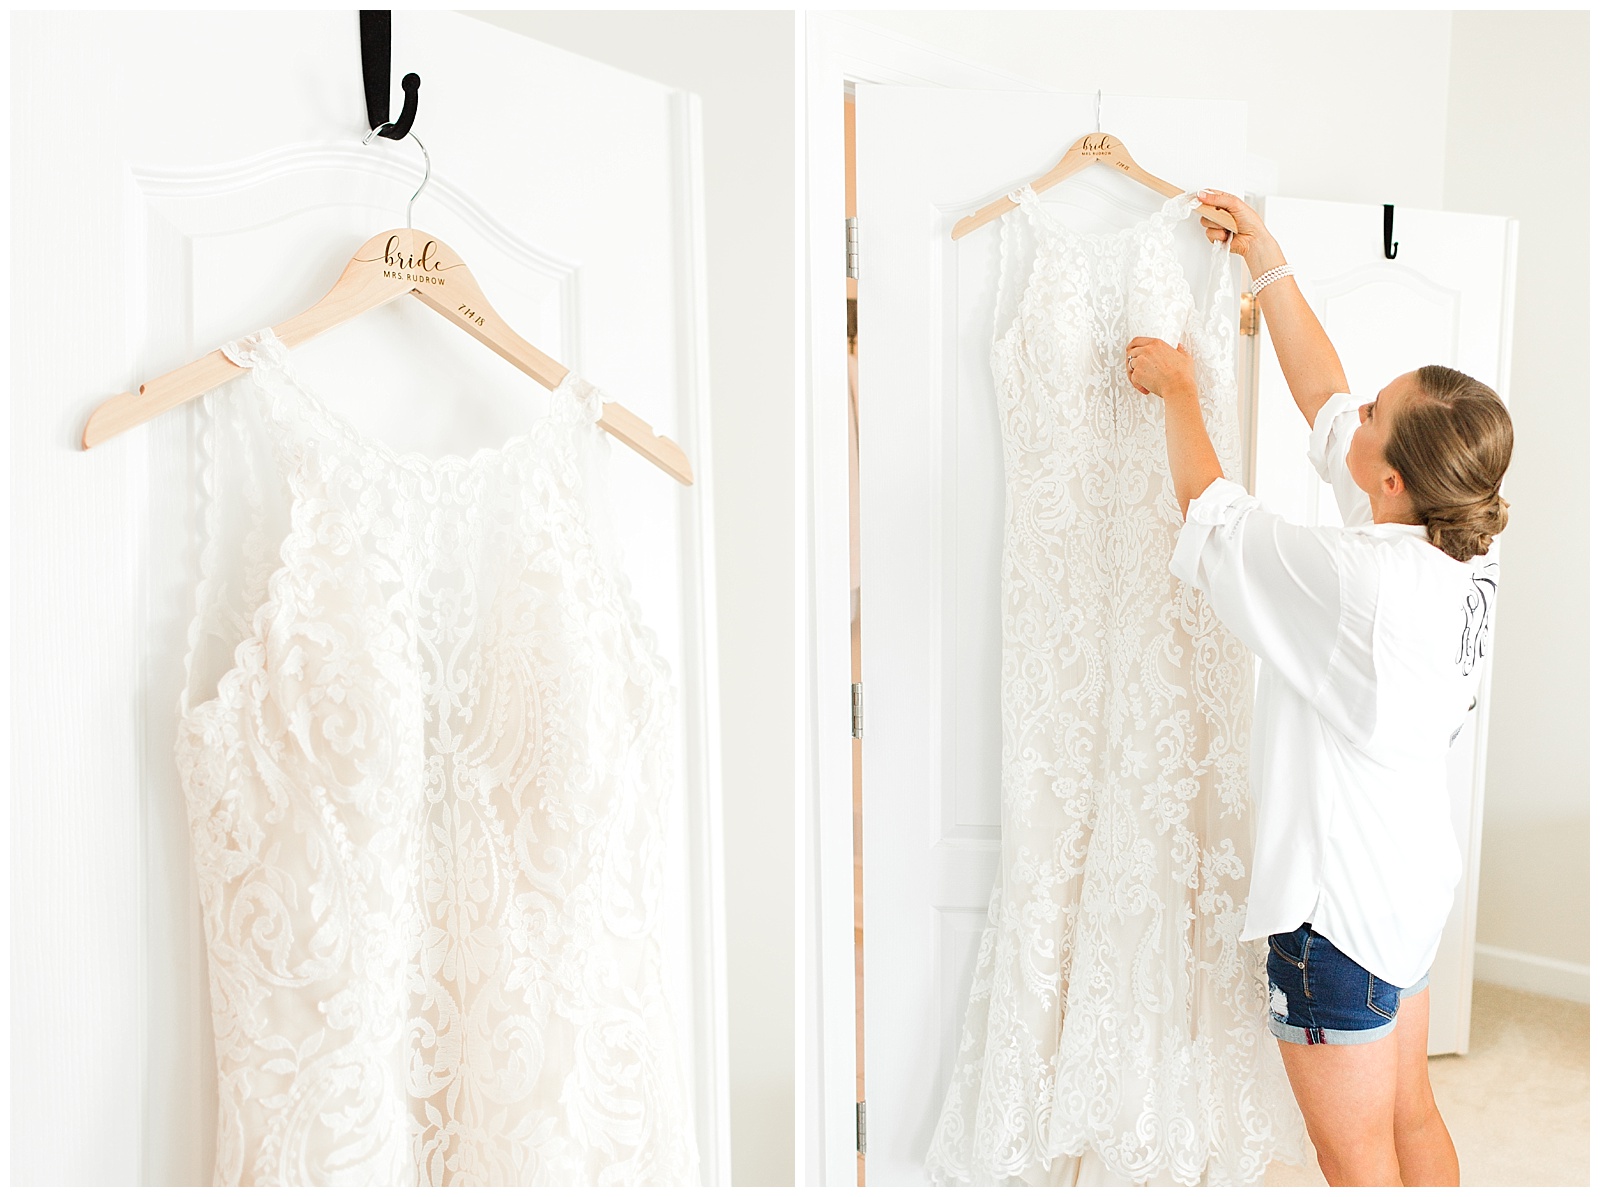 Bride's dress on a hanger with her married name